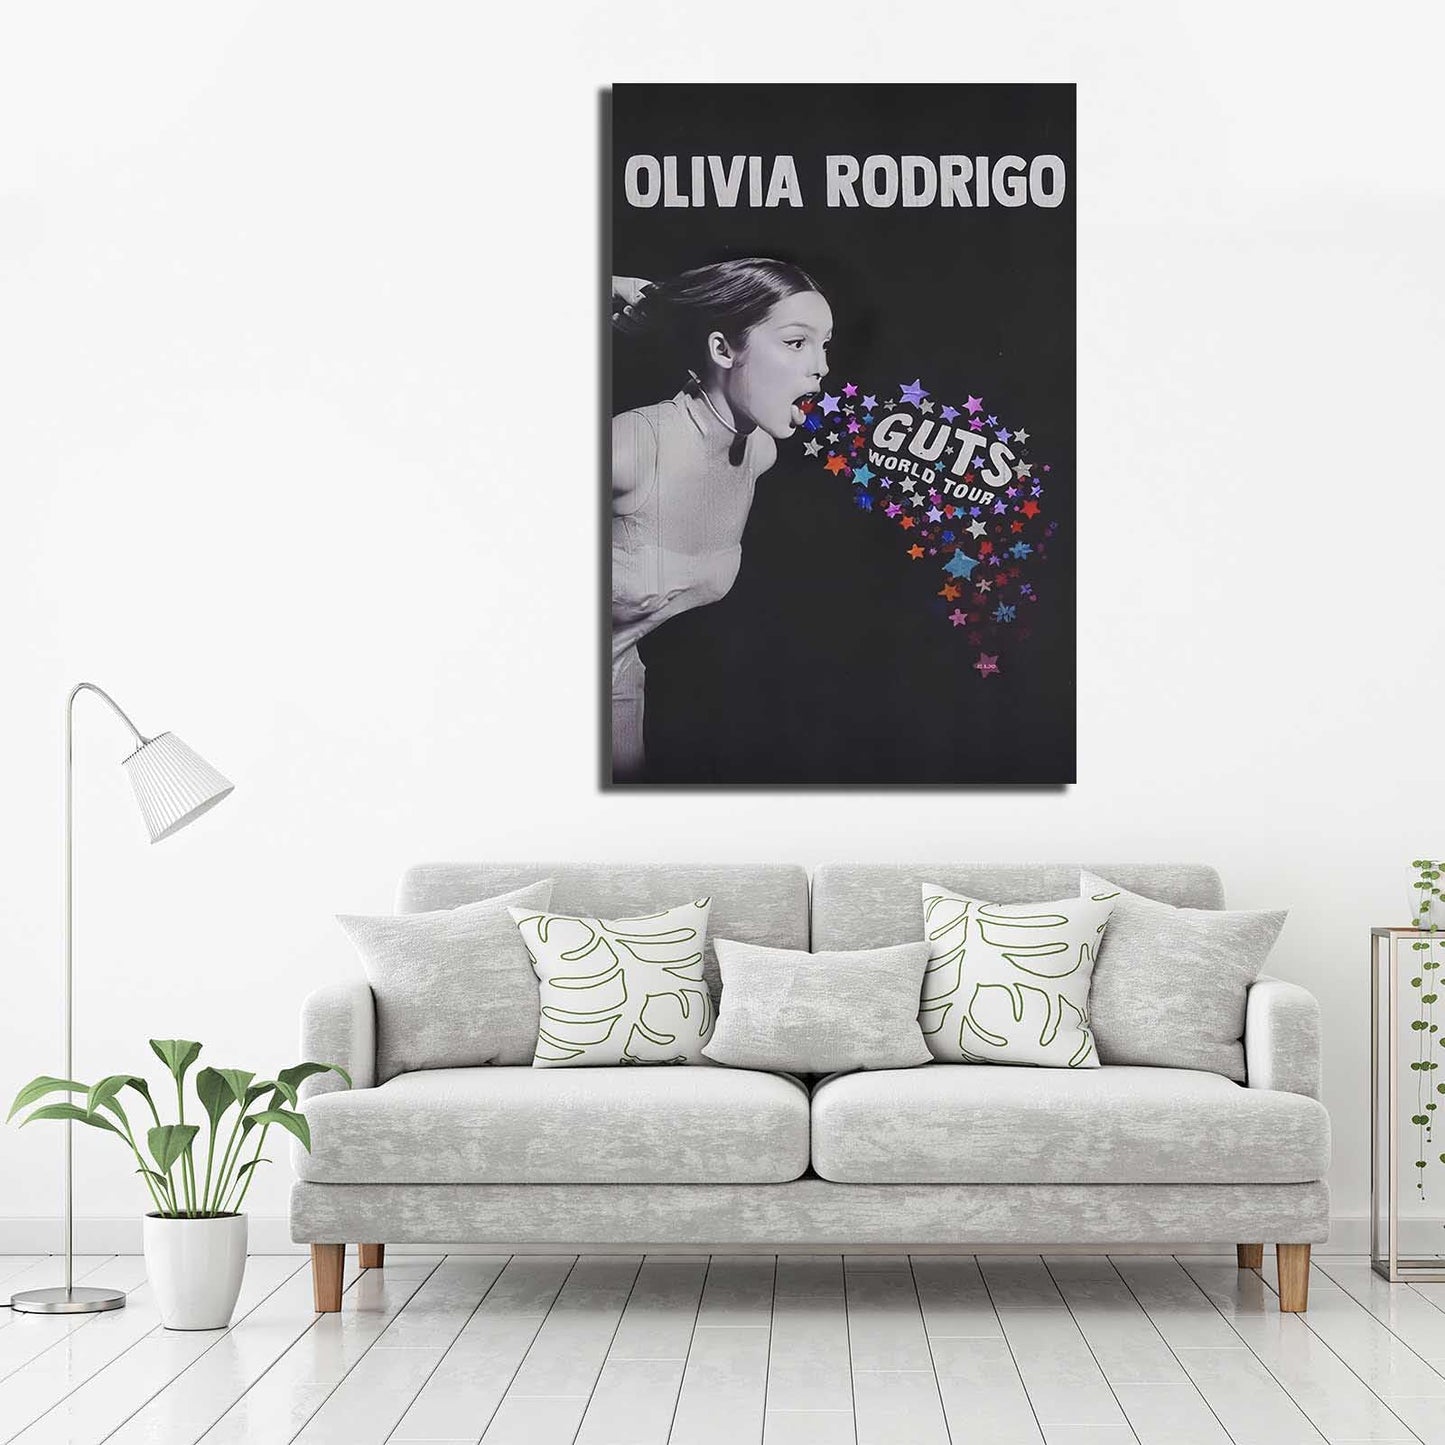 Olivia Poster Rodrigo Poster Guts Album Cover Suitable for Hanging In Living Room Bedroom And Art Picture Print Modern Family Bedroom Decor Posters (Canvas Roll 8x12 inch)